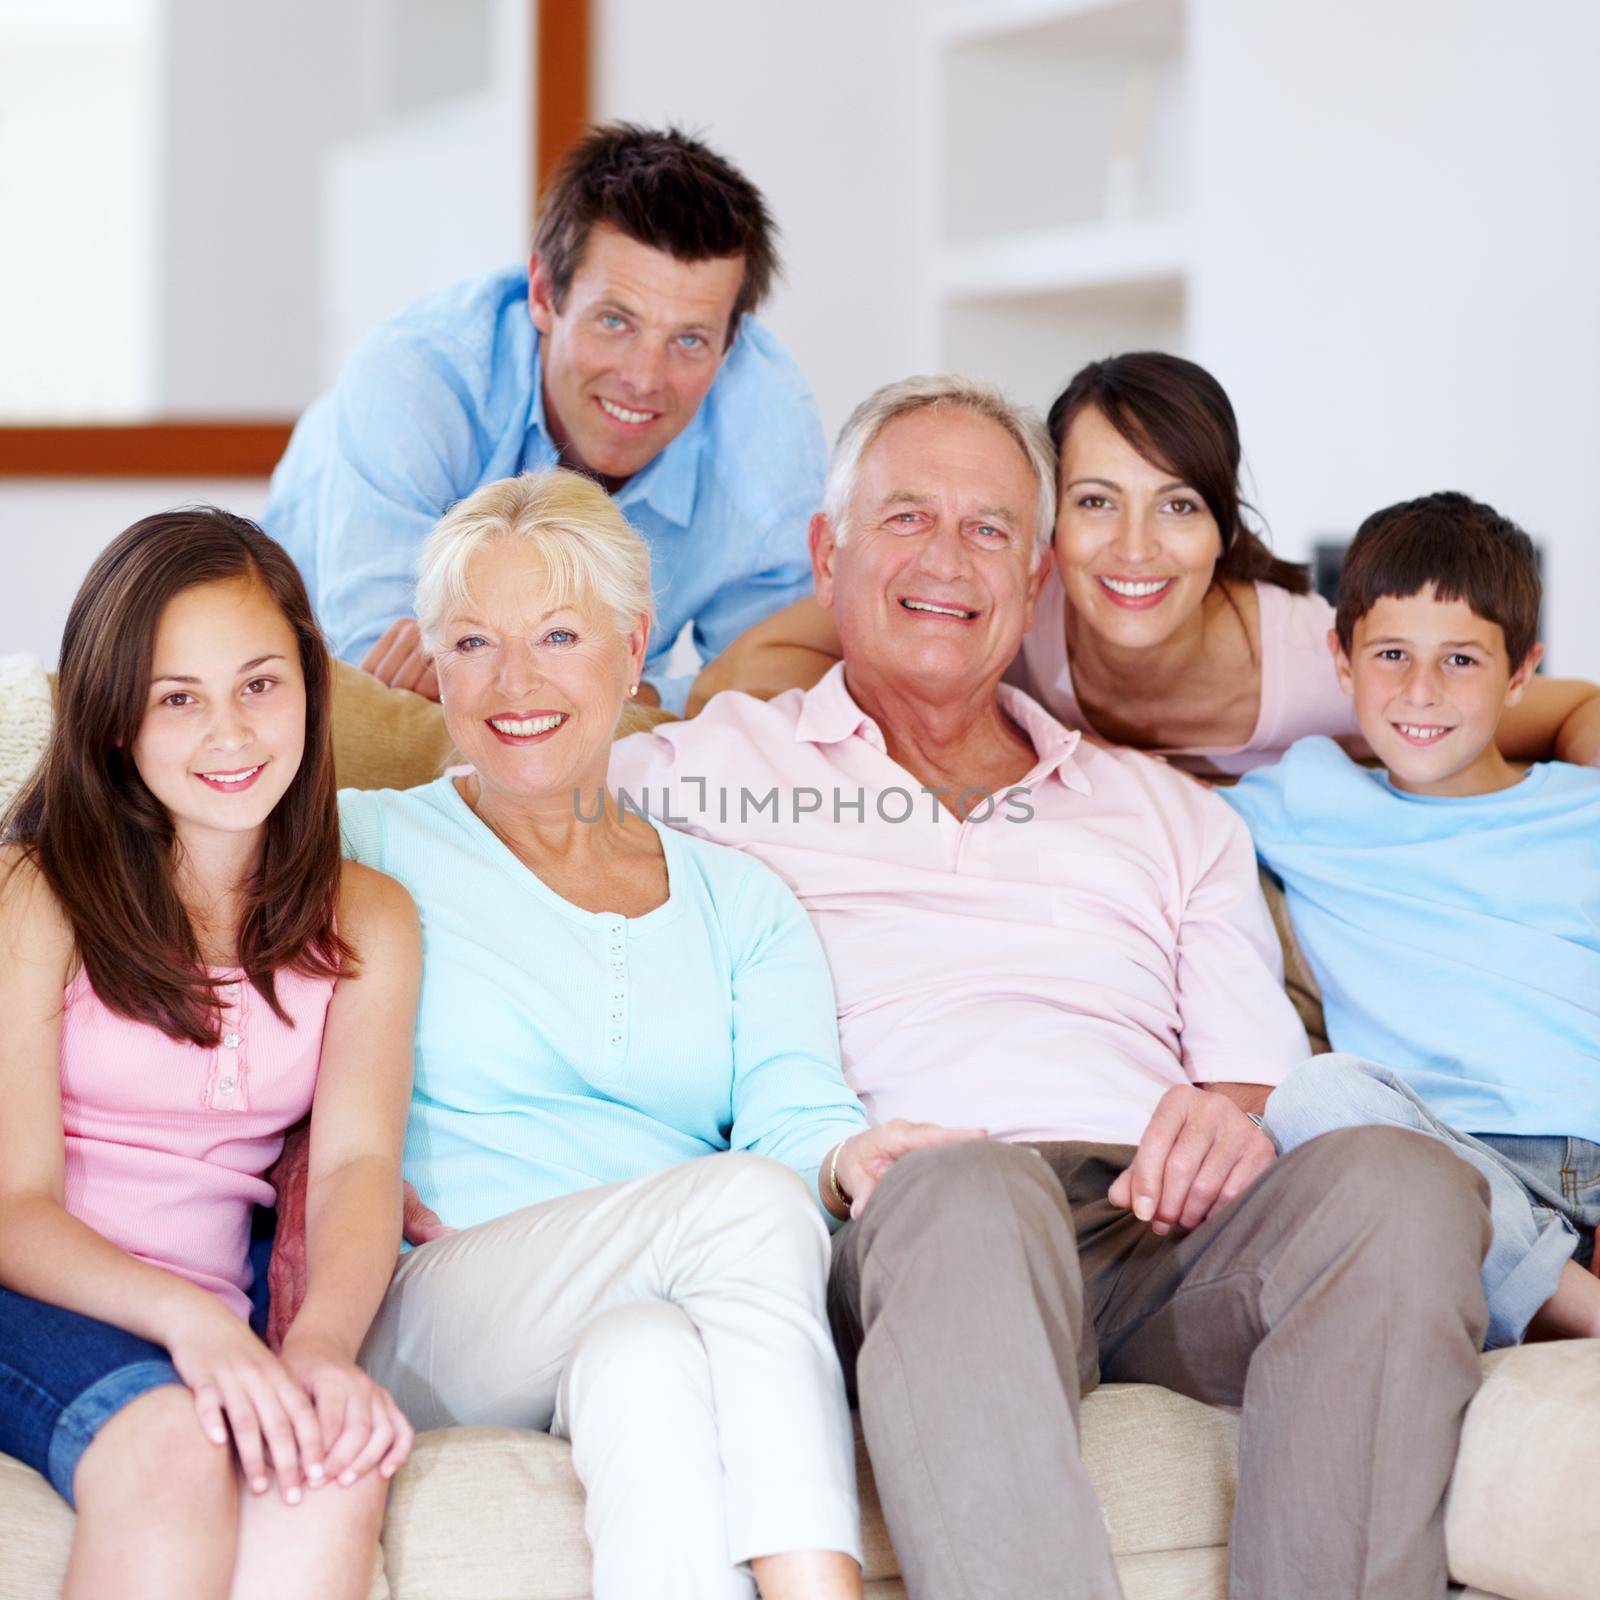 A proud, loving family enjoying time together. Three generations of family embracing one another on the lounge couch